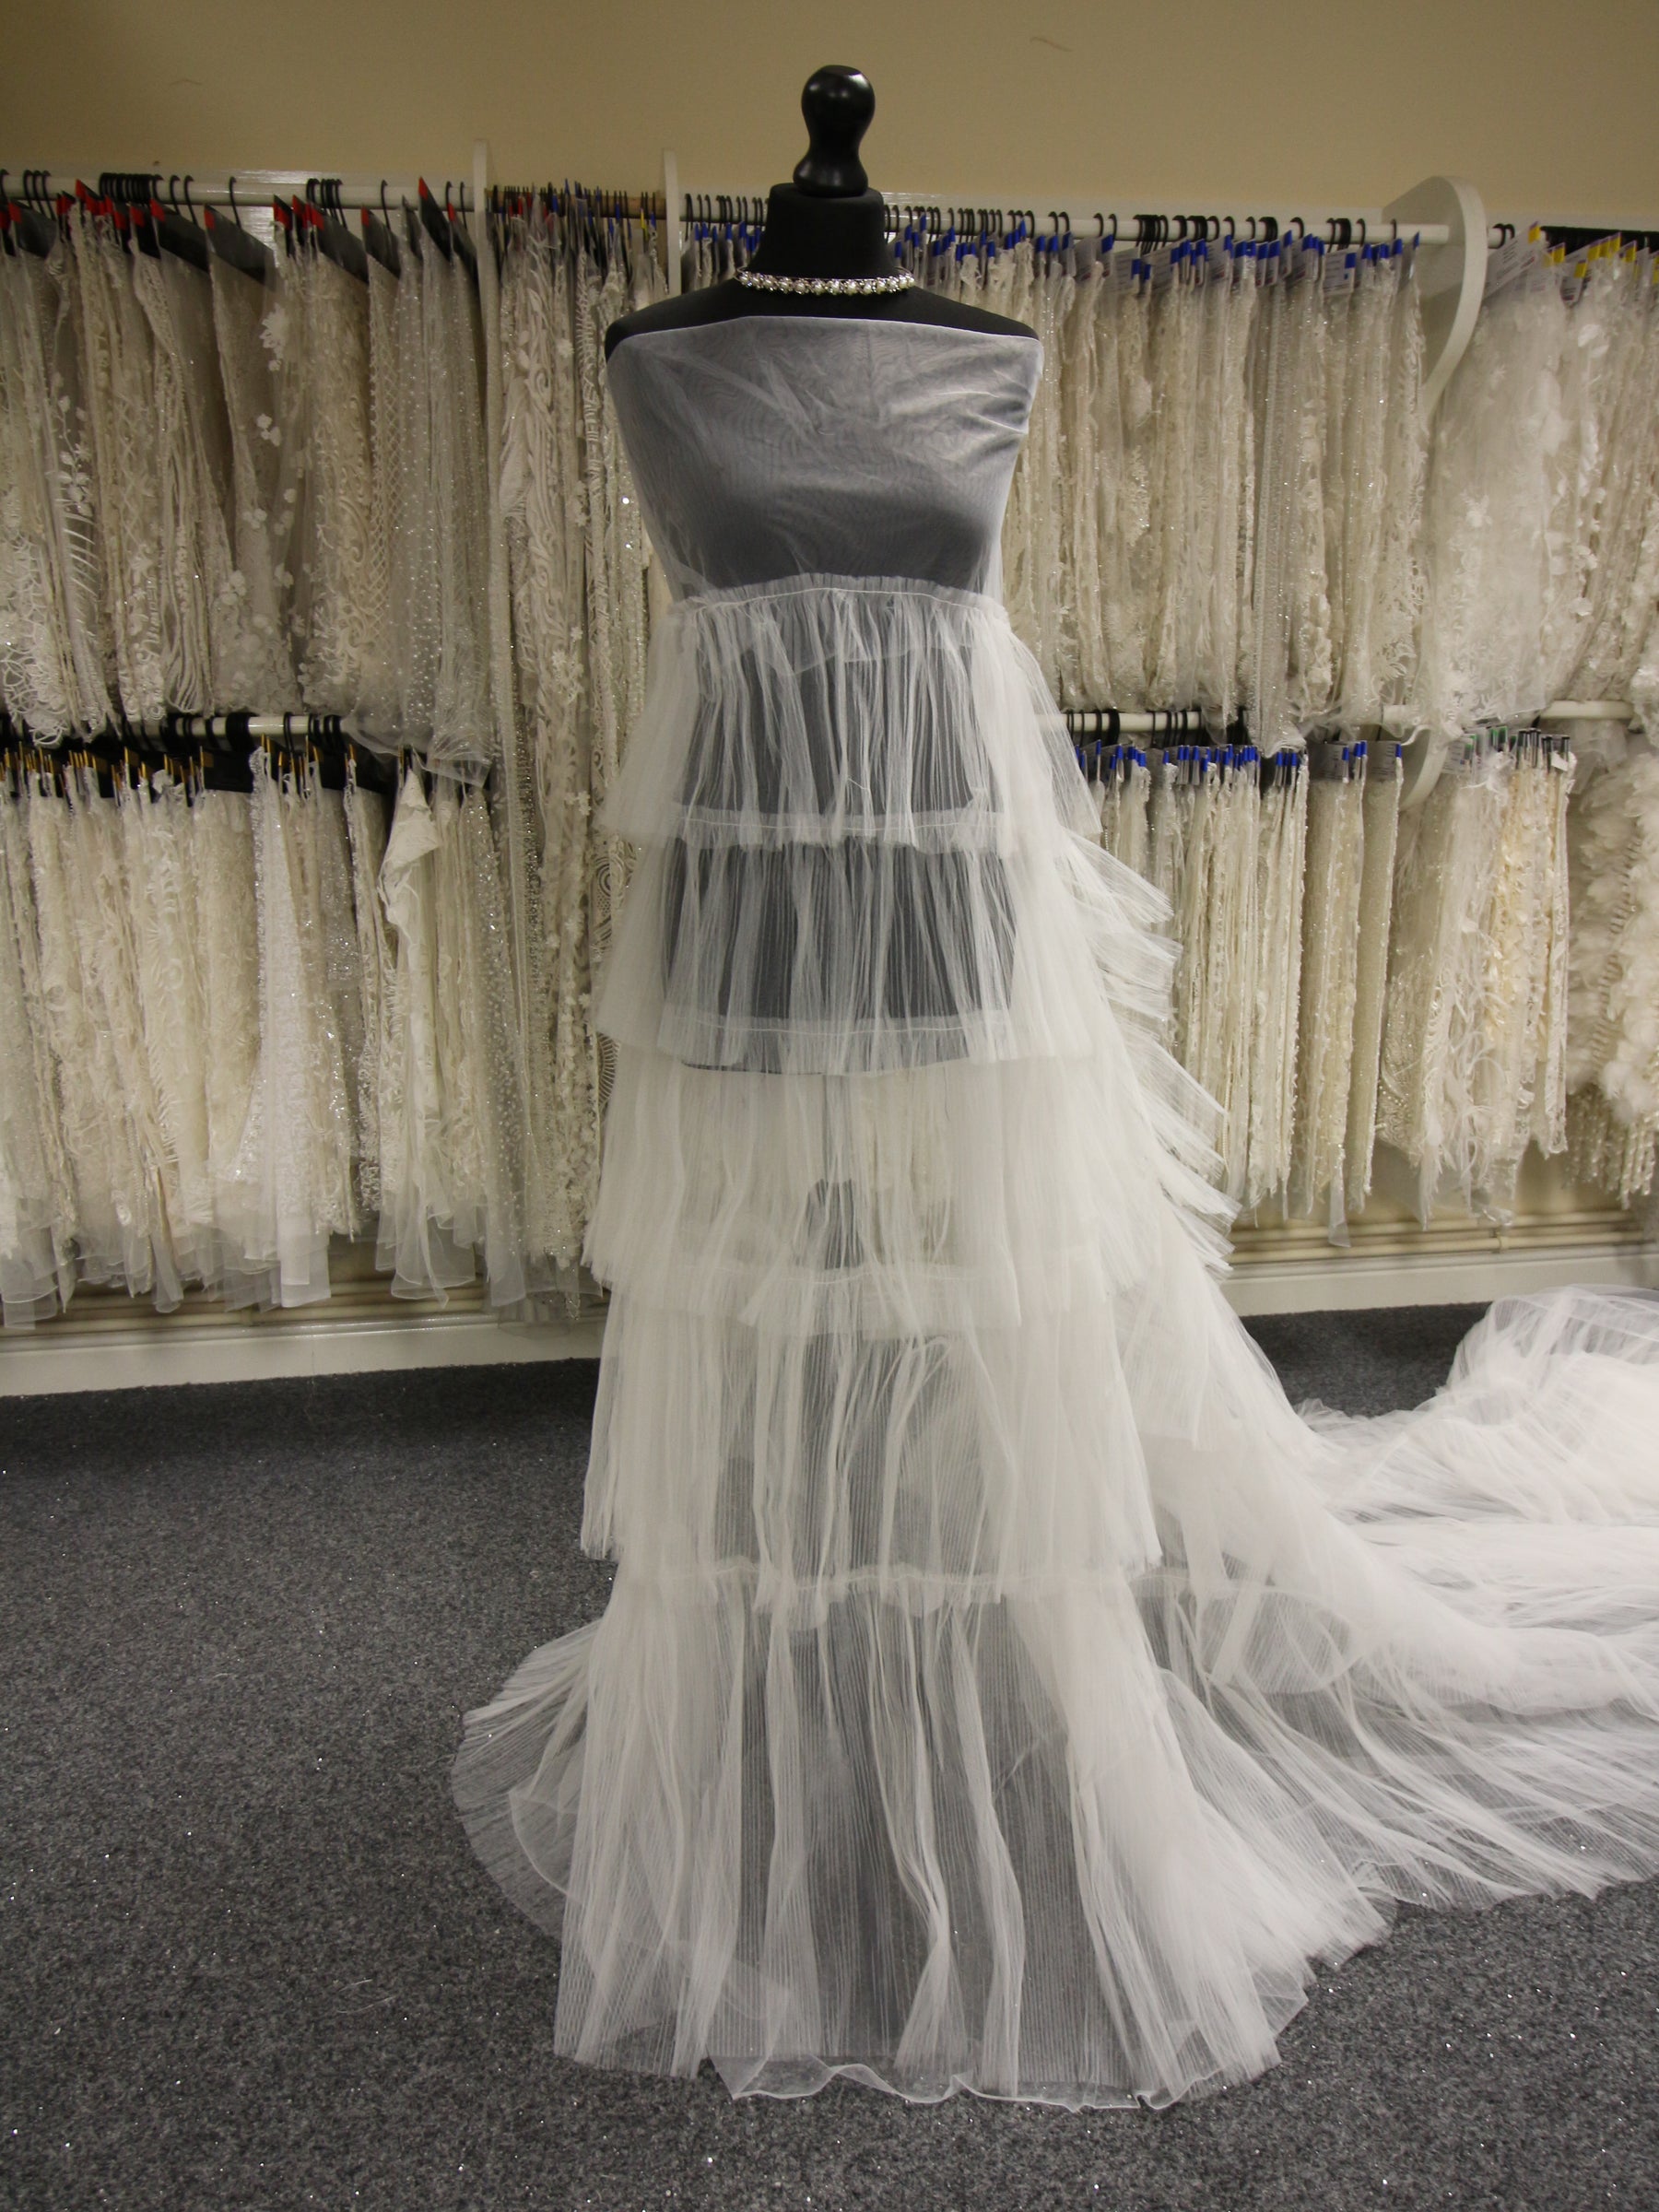 Ivory Pleated Tulle - Layers